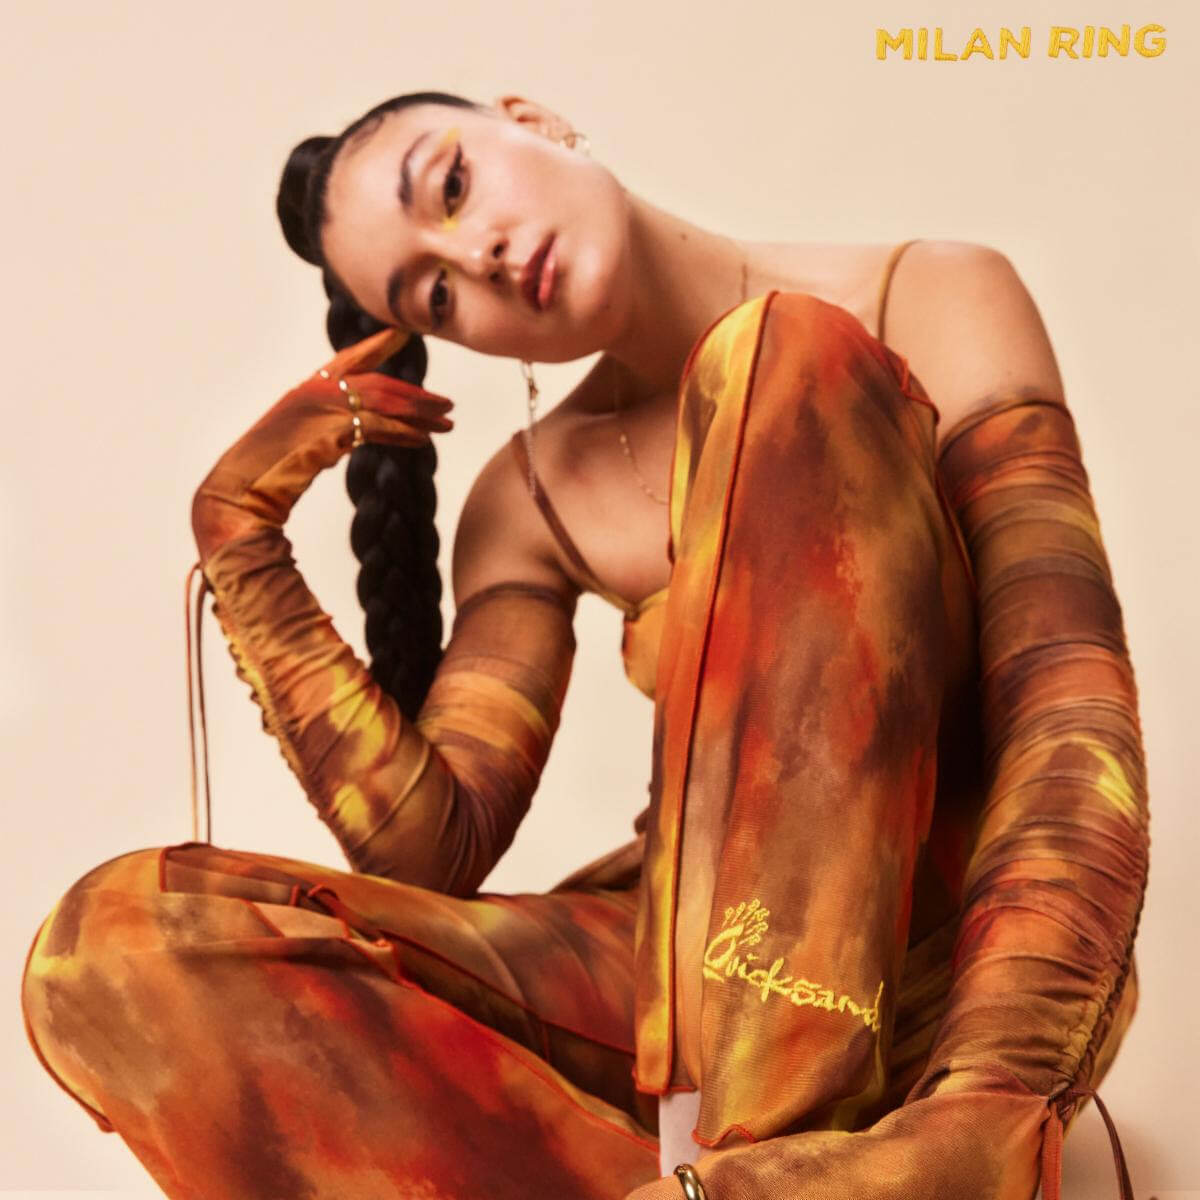 "Quicksand" By Milan Ring is Northern Transmissions Song of the Day. The Australian artist's track is now out via Astral People Recordings